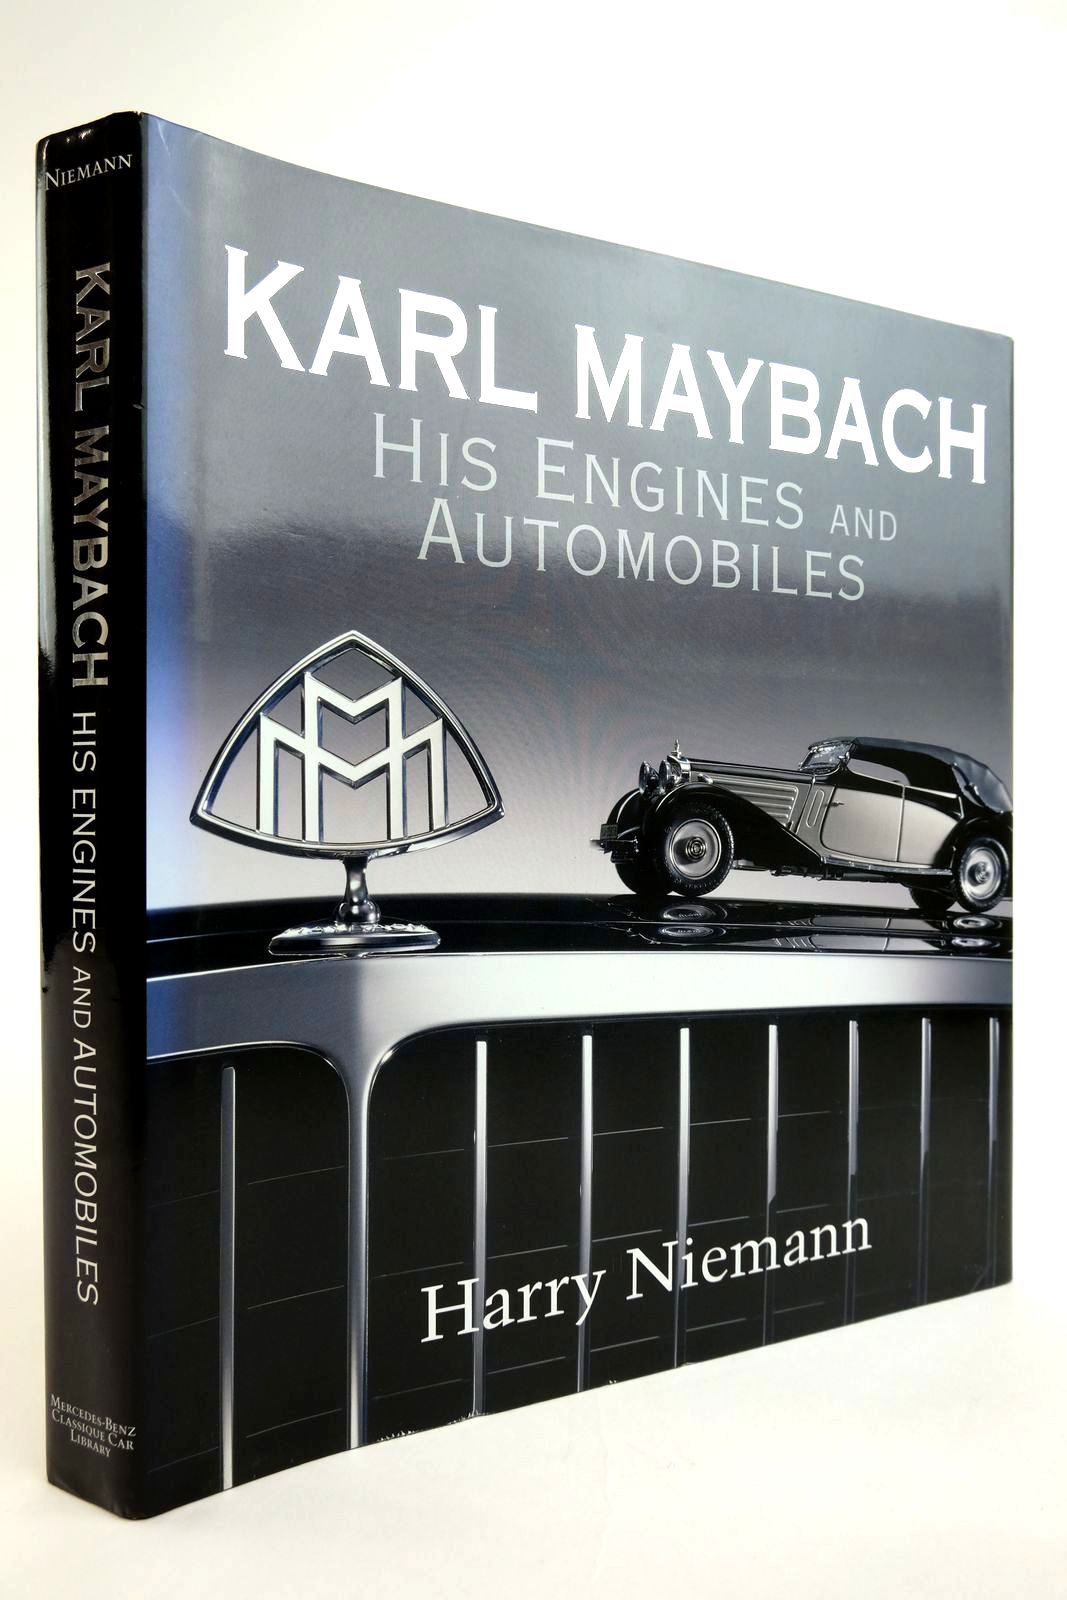 Photo of KARL MAYBACH HIS ENGINES AND AUTOMOBILES written by Niemann, Harry published by Mercedes-Benz Classique Car Library (STOCK CODE: 2135004)  for sale by Stella & Rose's Books